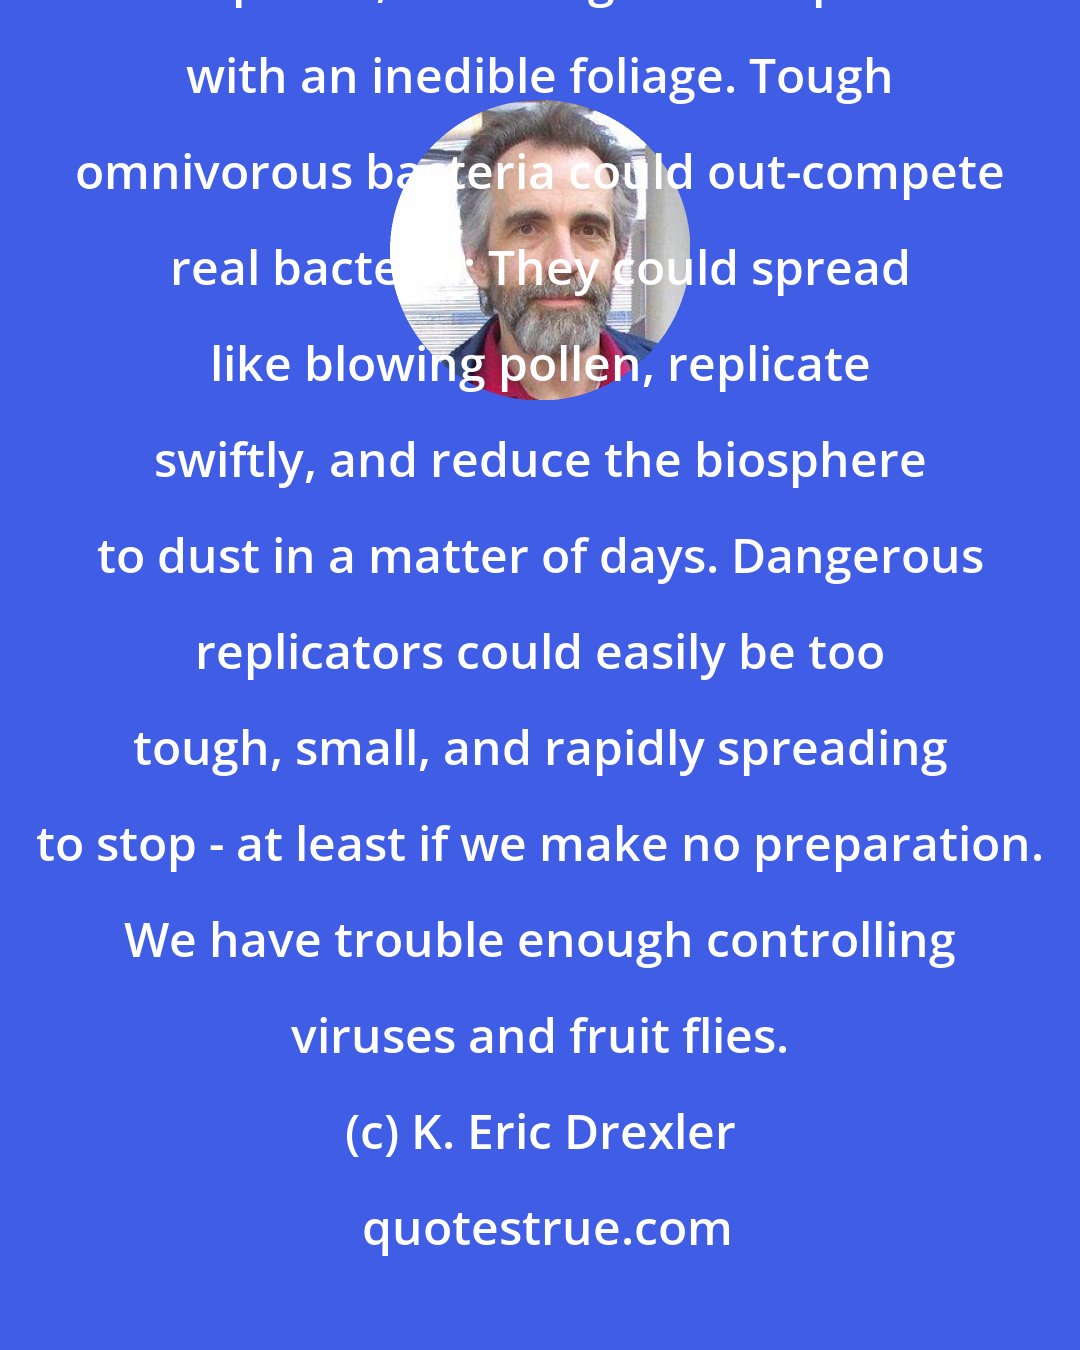 K. Eric Drexler: Plants with leaves no more efficient than today's solar cells could out-compete real plants, crowding the biosphere with an inedible foliage. Tough omnivorous bacteria could out-compete real bacteria: They could spread like blowing pollen, replicate swiftly, and reduce the biosphere to dust in a matter of days. Dangerous replicators could easily be too tough, small, and rapidly spreading to stop - at least if we make no preparation. We have trouble enough controlling viruses and fruit flies.